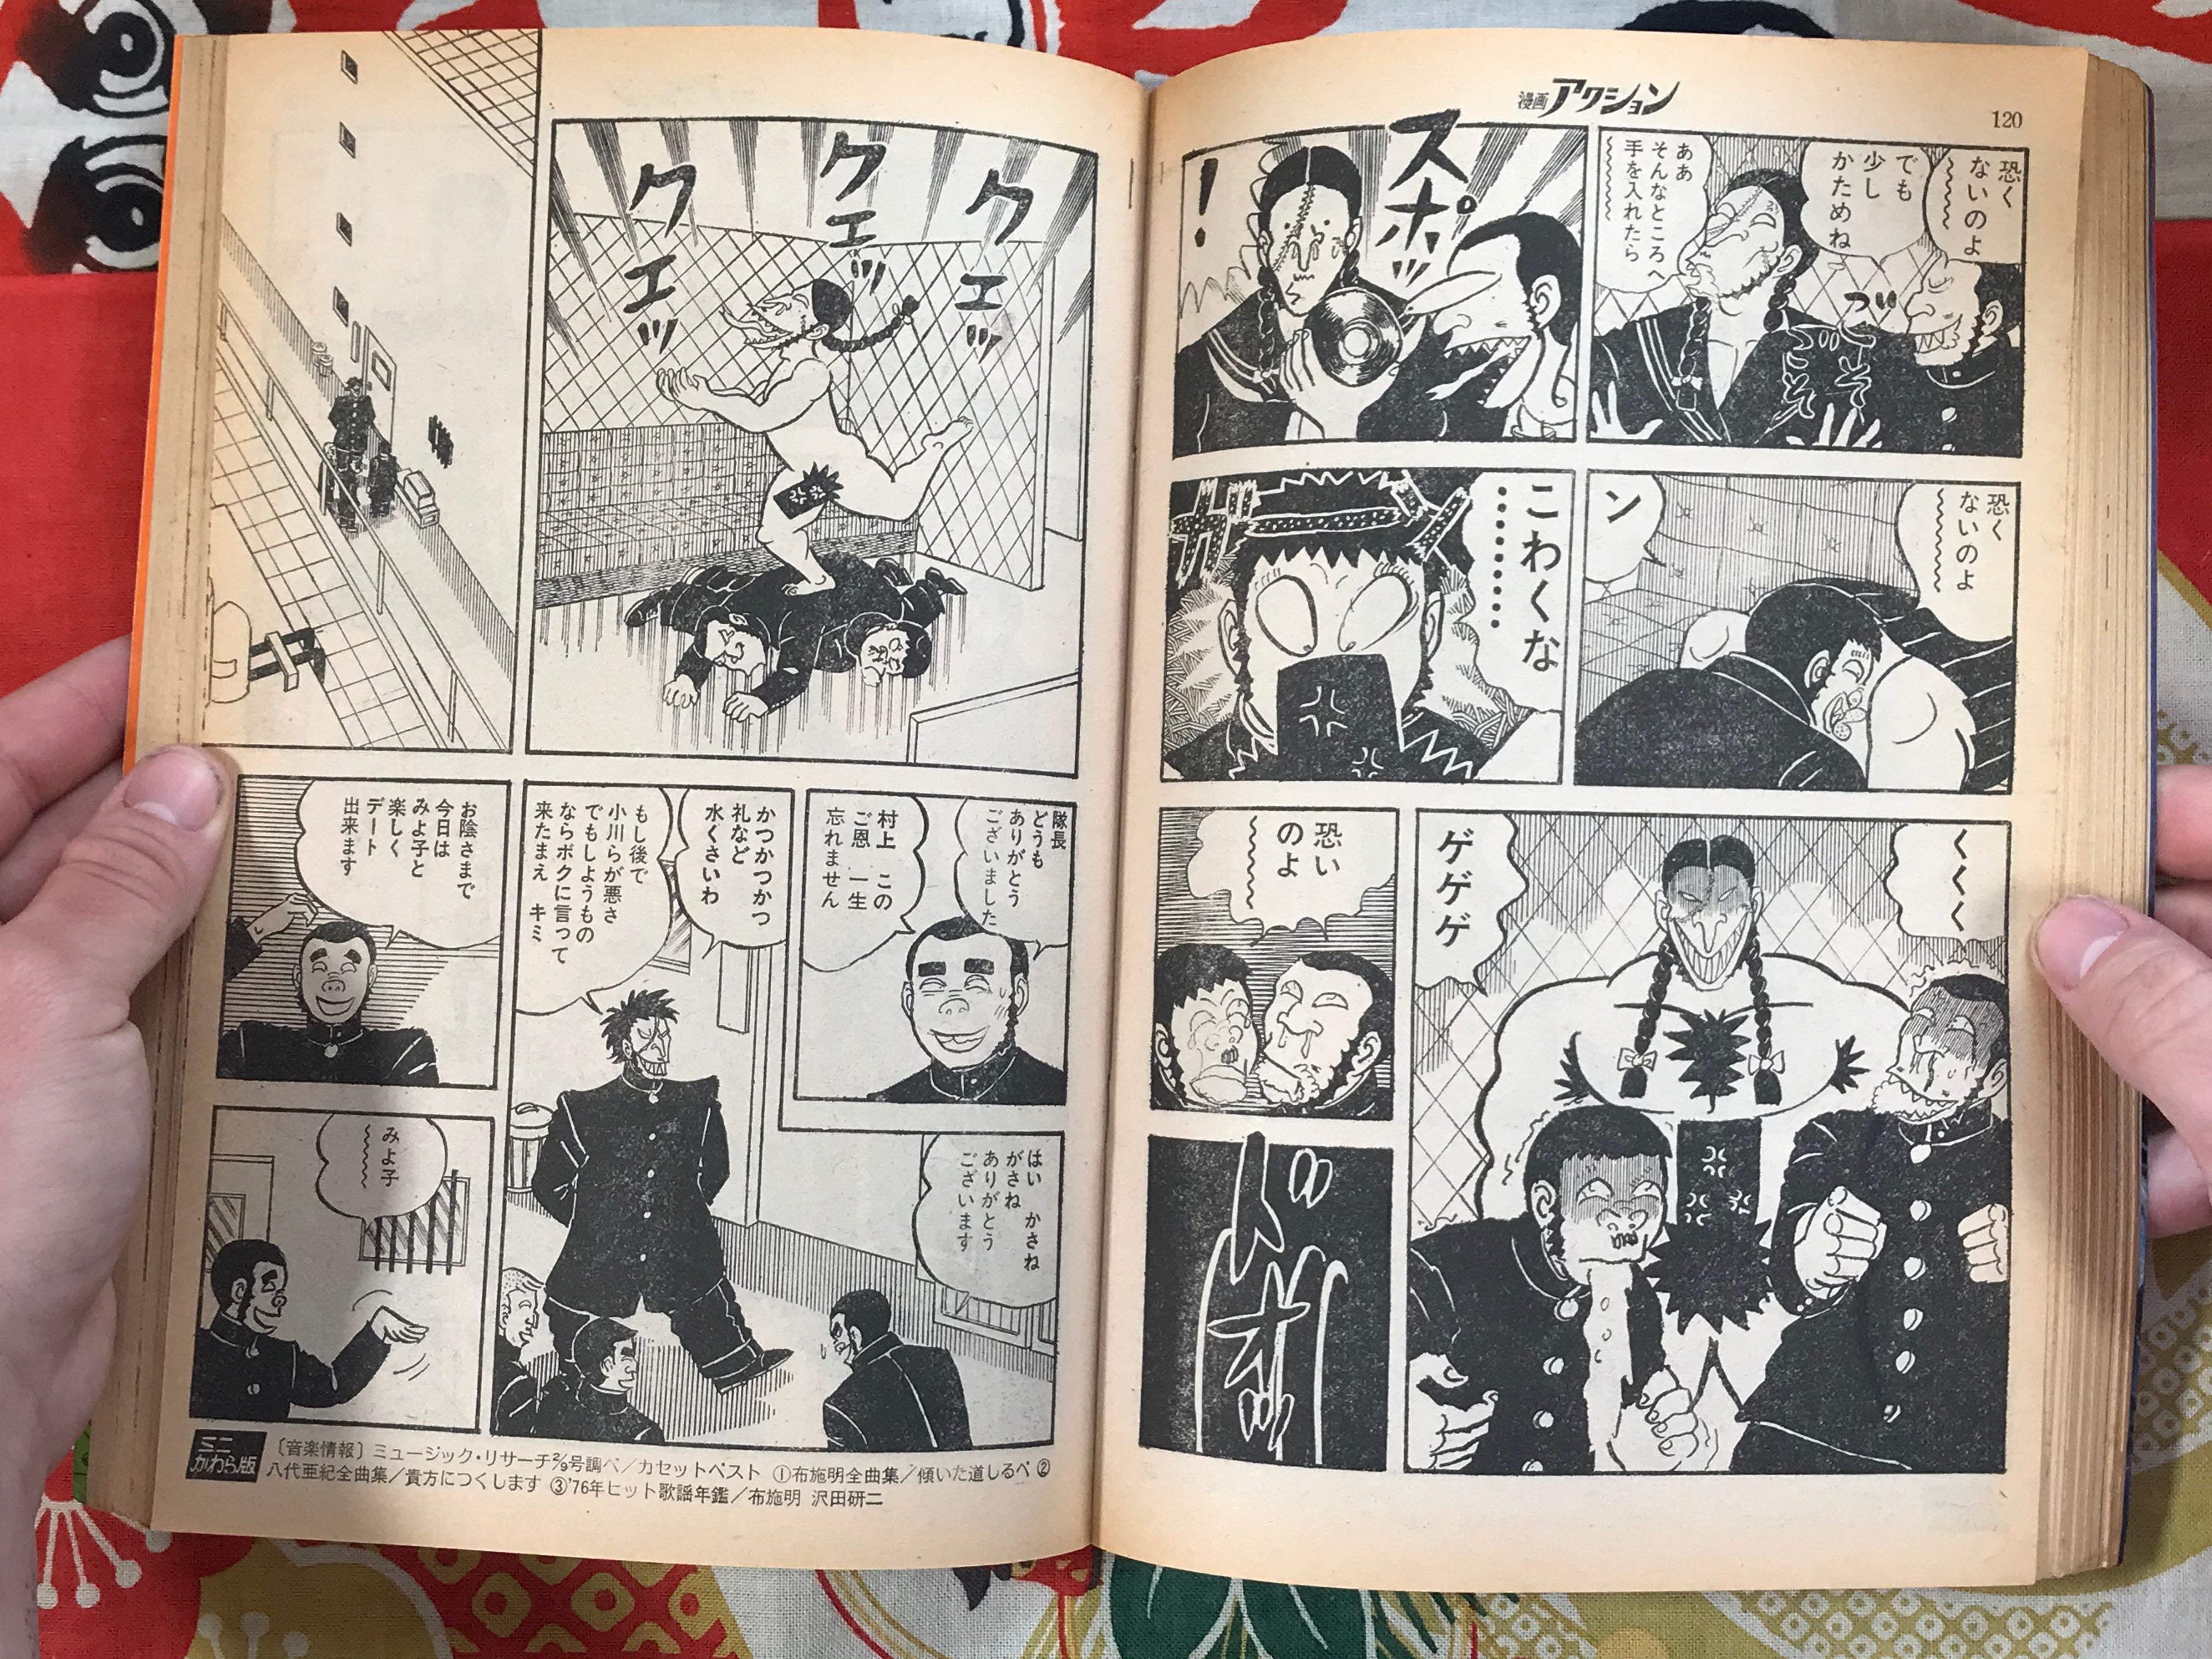 Weekly Manga Action featuring Lone Wolf and Cub, Kazuo Kamimura, etc (1976 March 4)